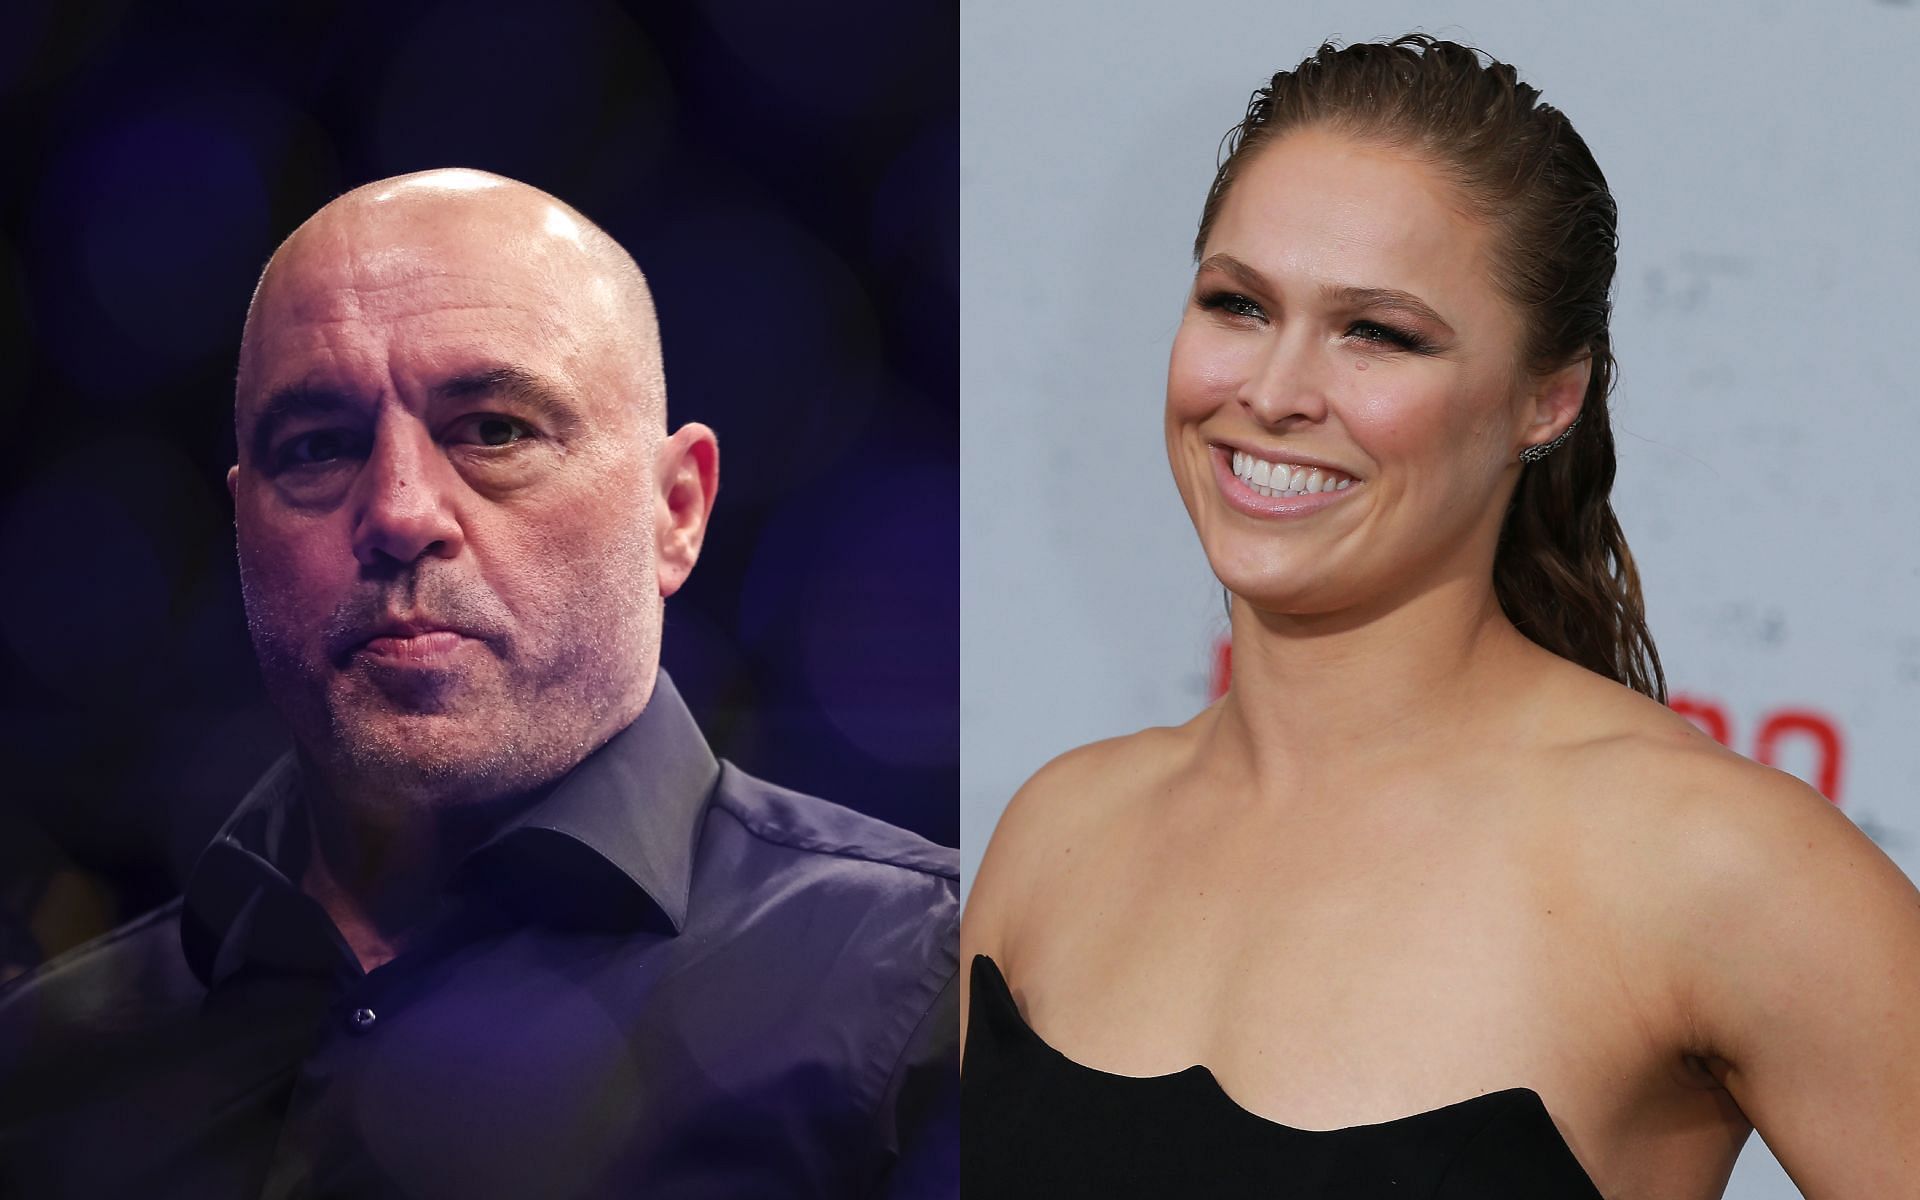 Ronda Rousey (right) on her relationship with Joe Rogan (left) and MMA media [Image via: Getty Images] 